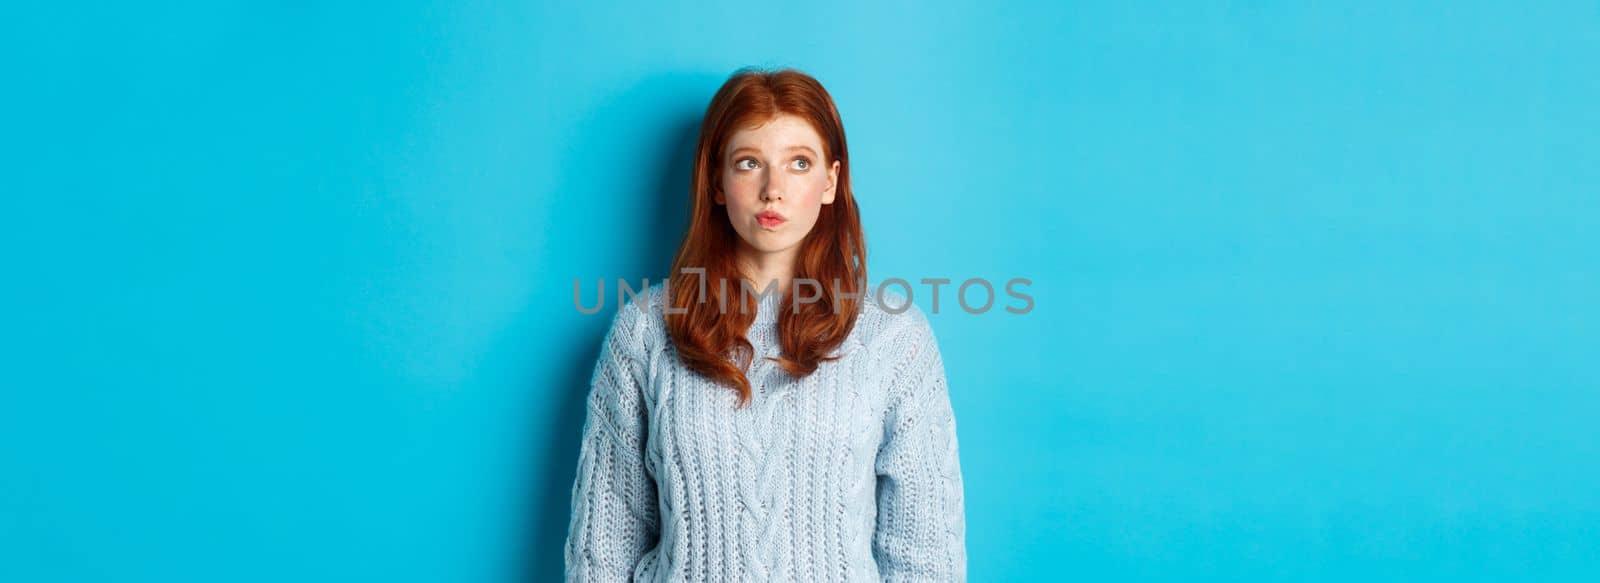 Dreamy redhead girl thinking or making decision, looking at upper left corner logo, standing against blue background.